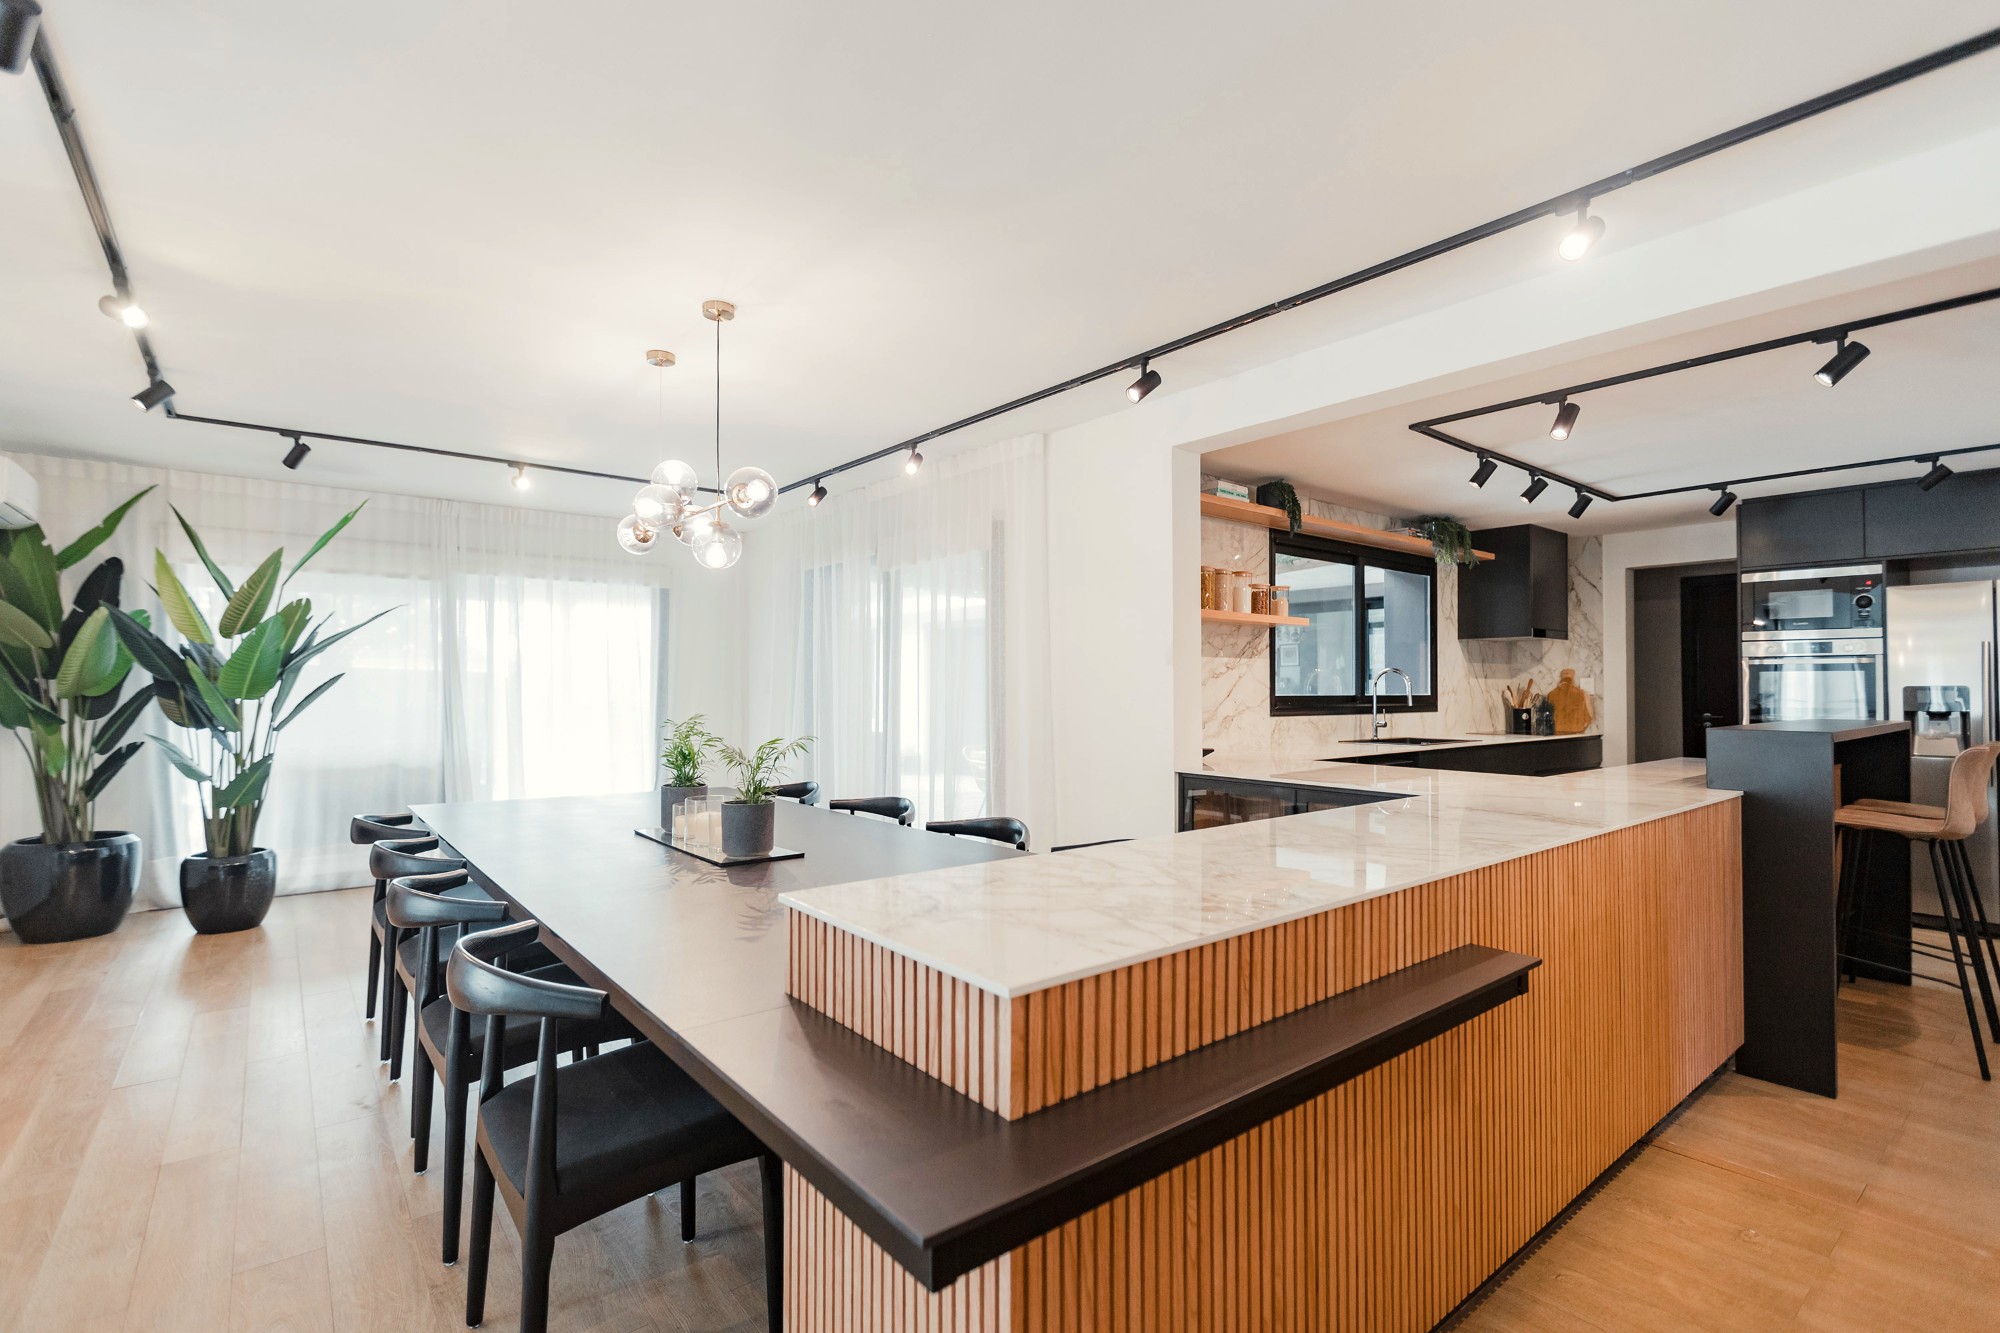 Image of IMG 6596 in Kitchen and dining room merged by a precise design - Cosentino